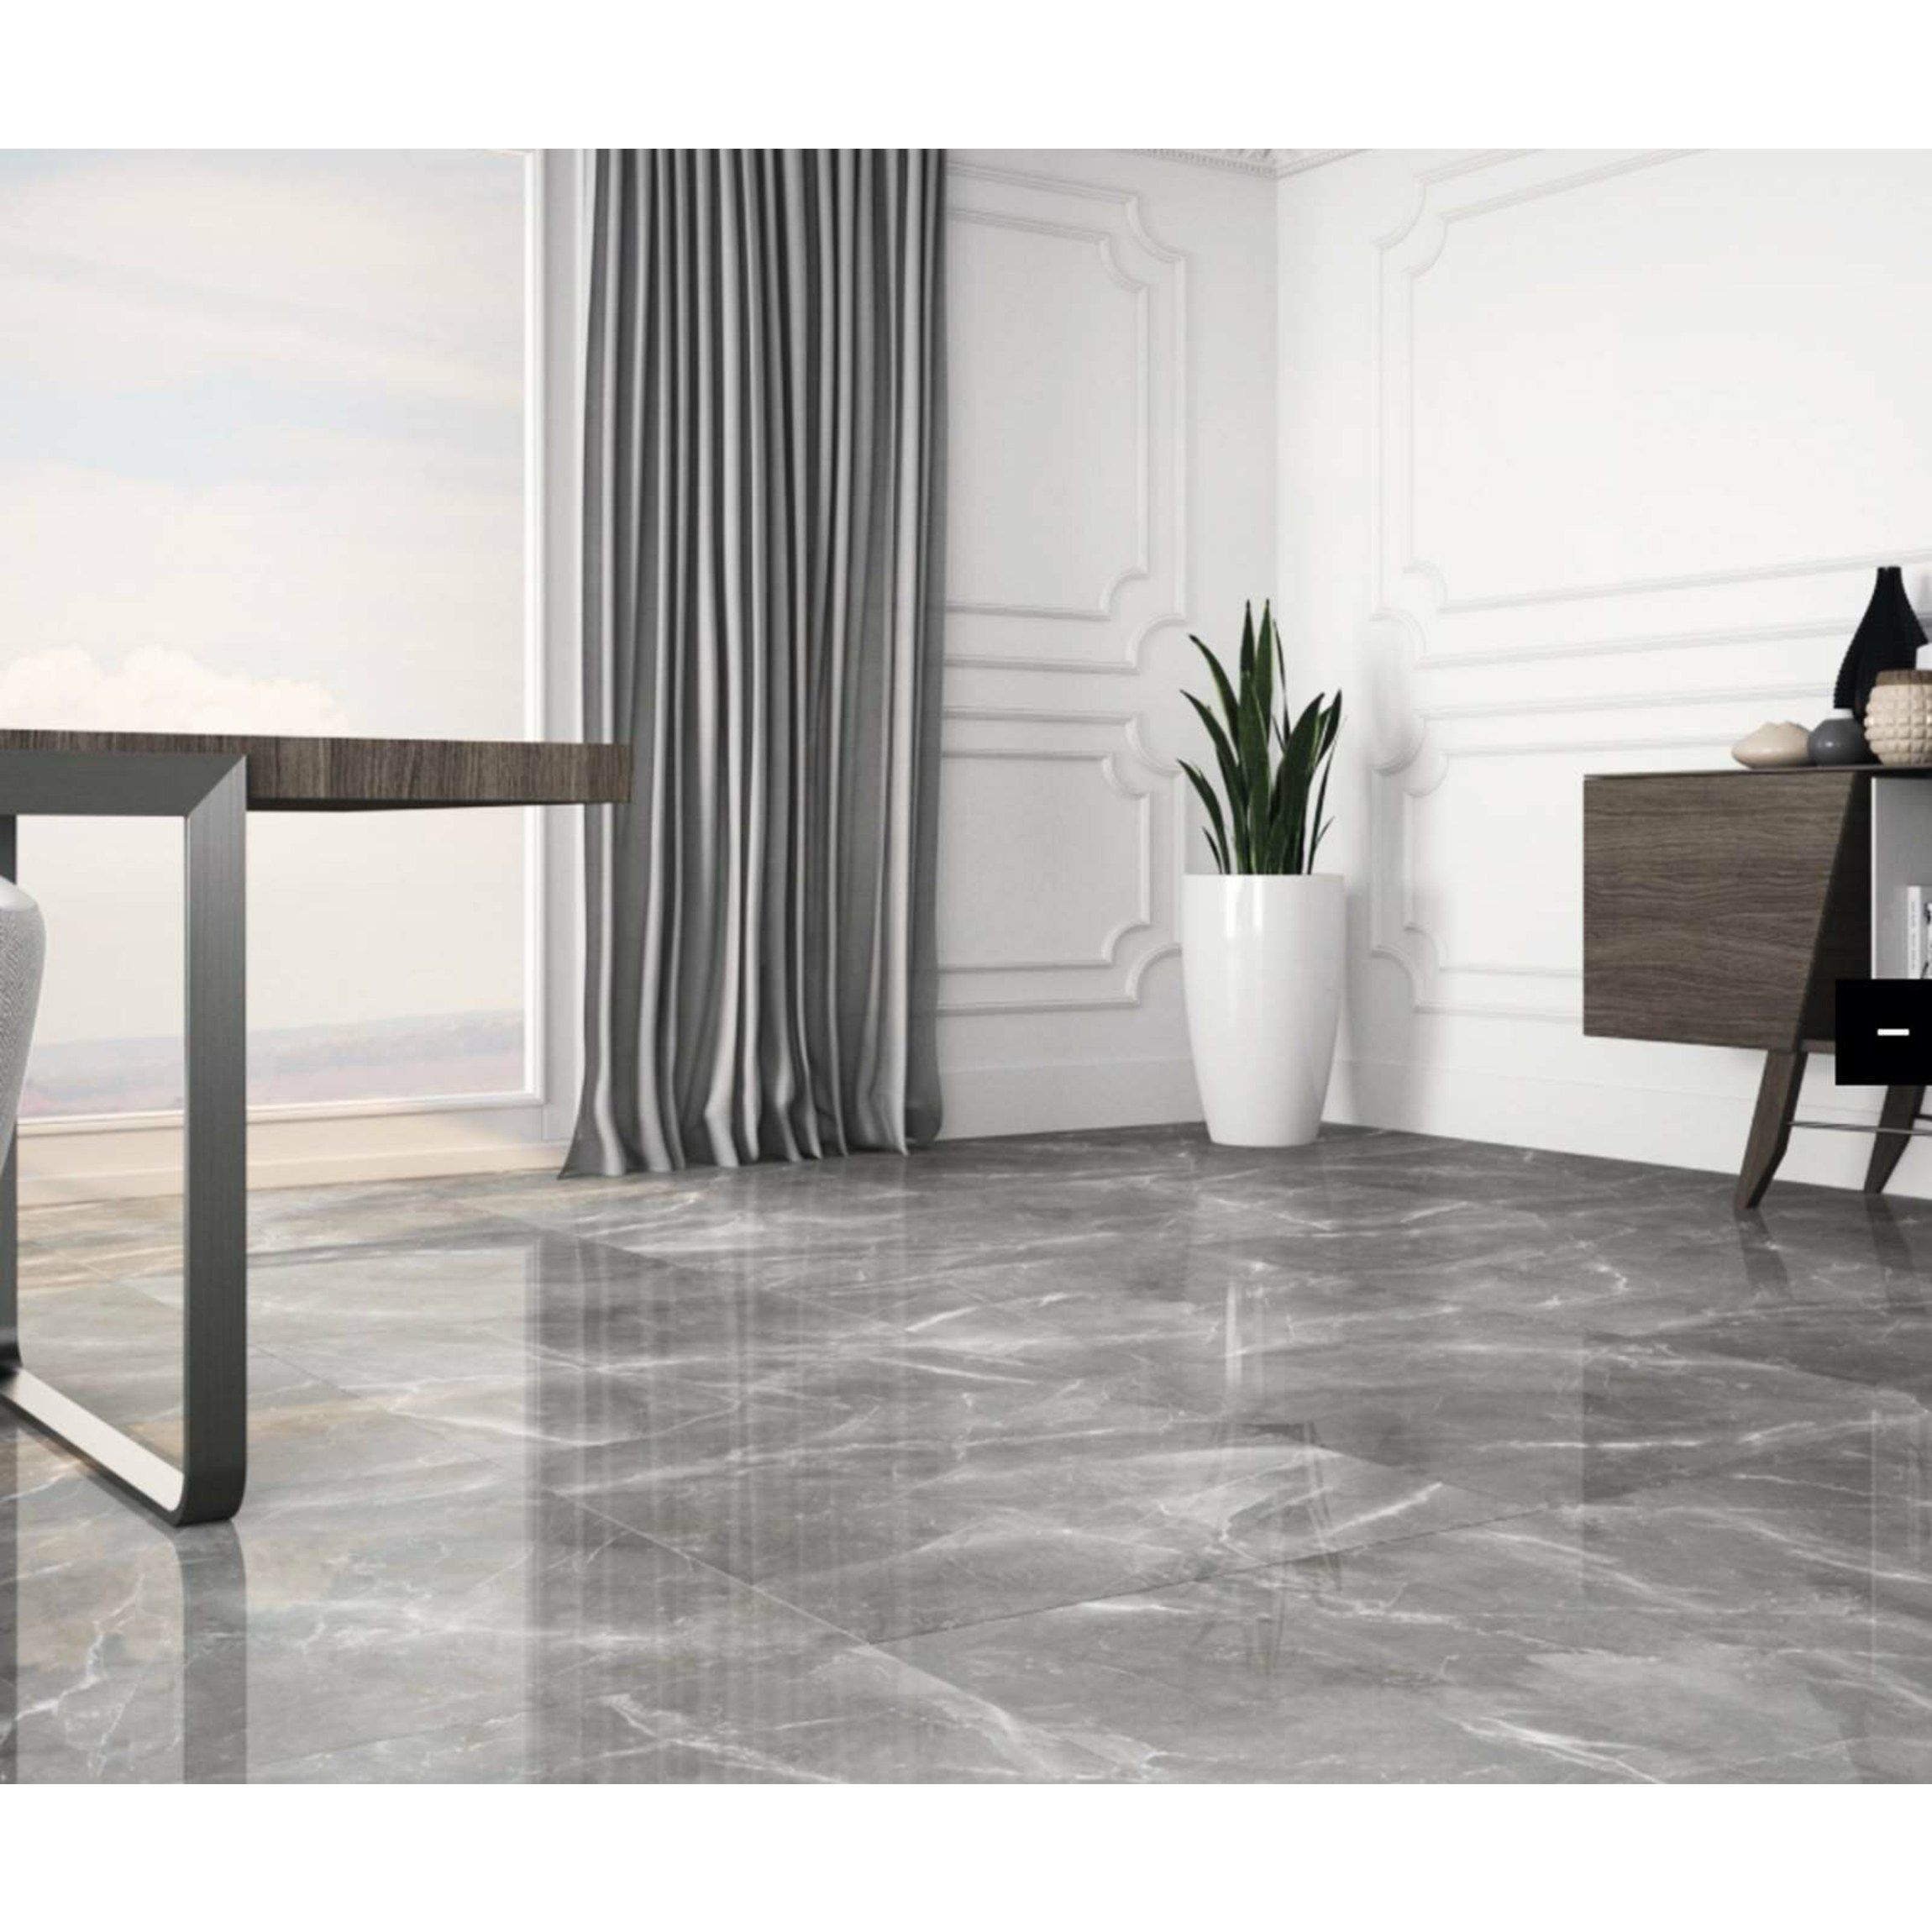 Marmy Grey Polished Marble Effect Porcelain - Salon Floor Tiles from